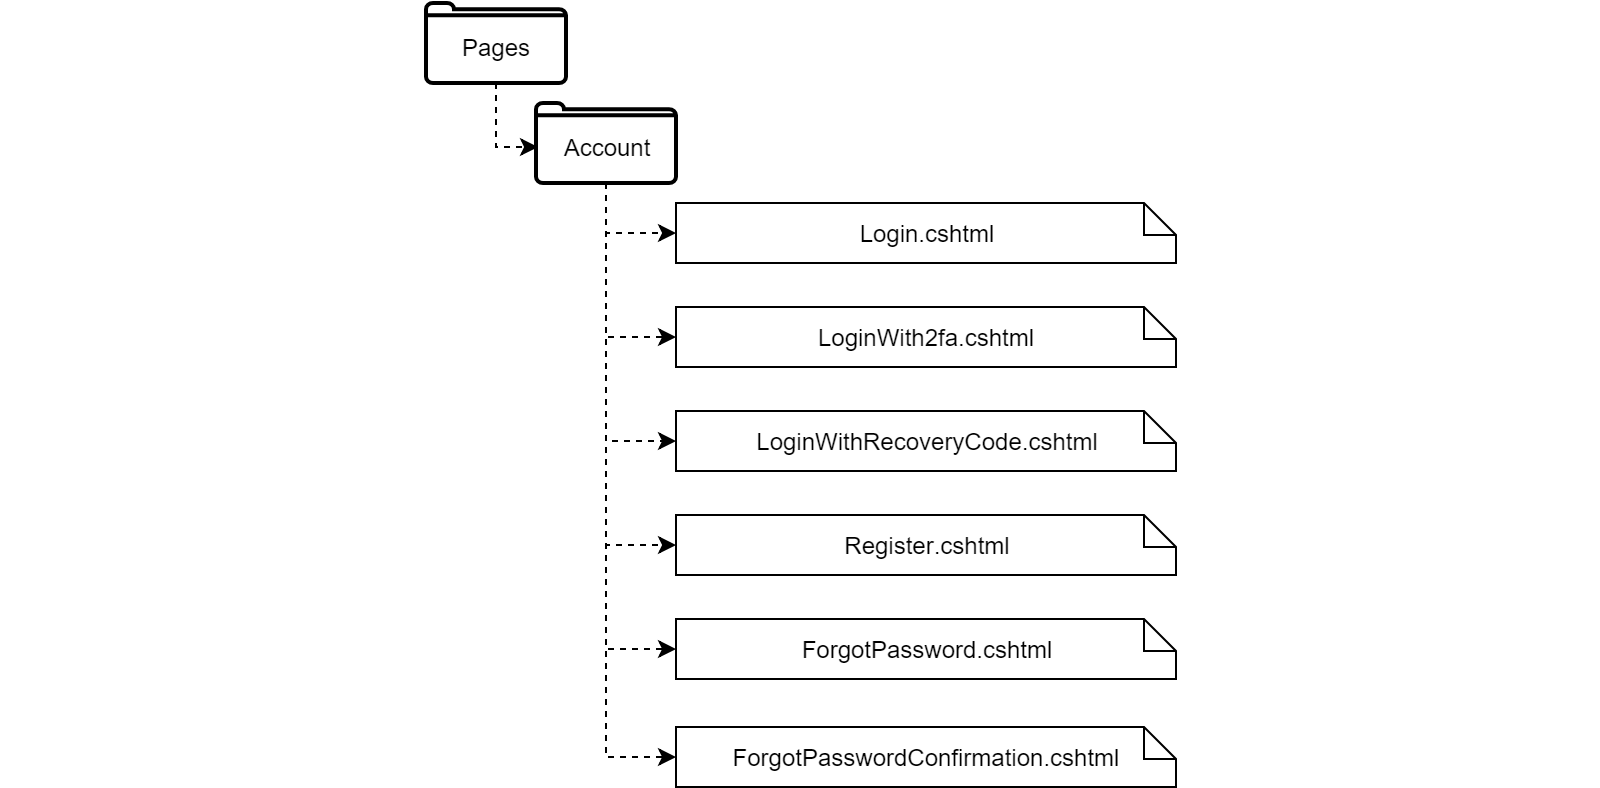 Diagram showing same Identity controller split into Pages